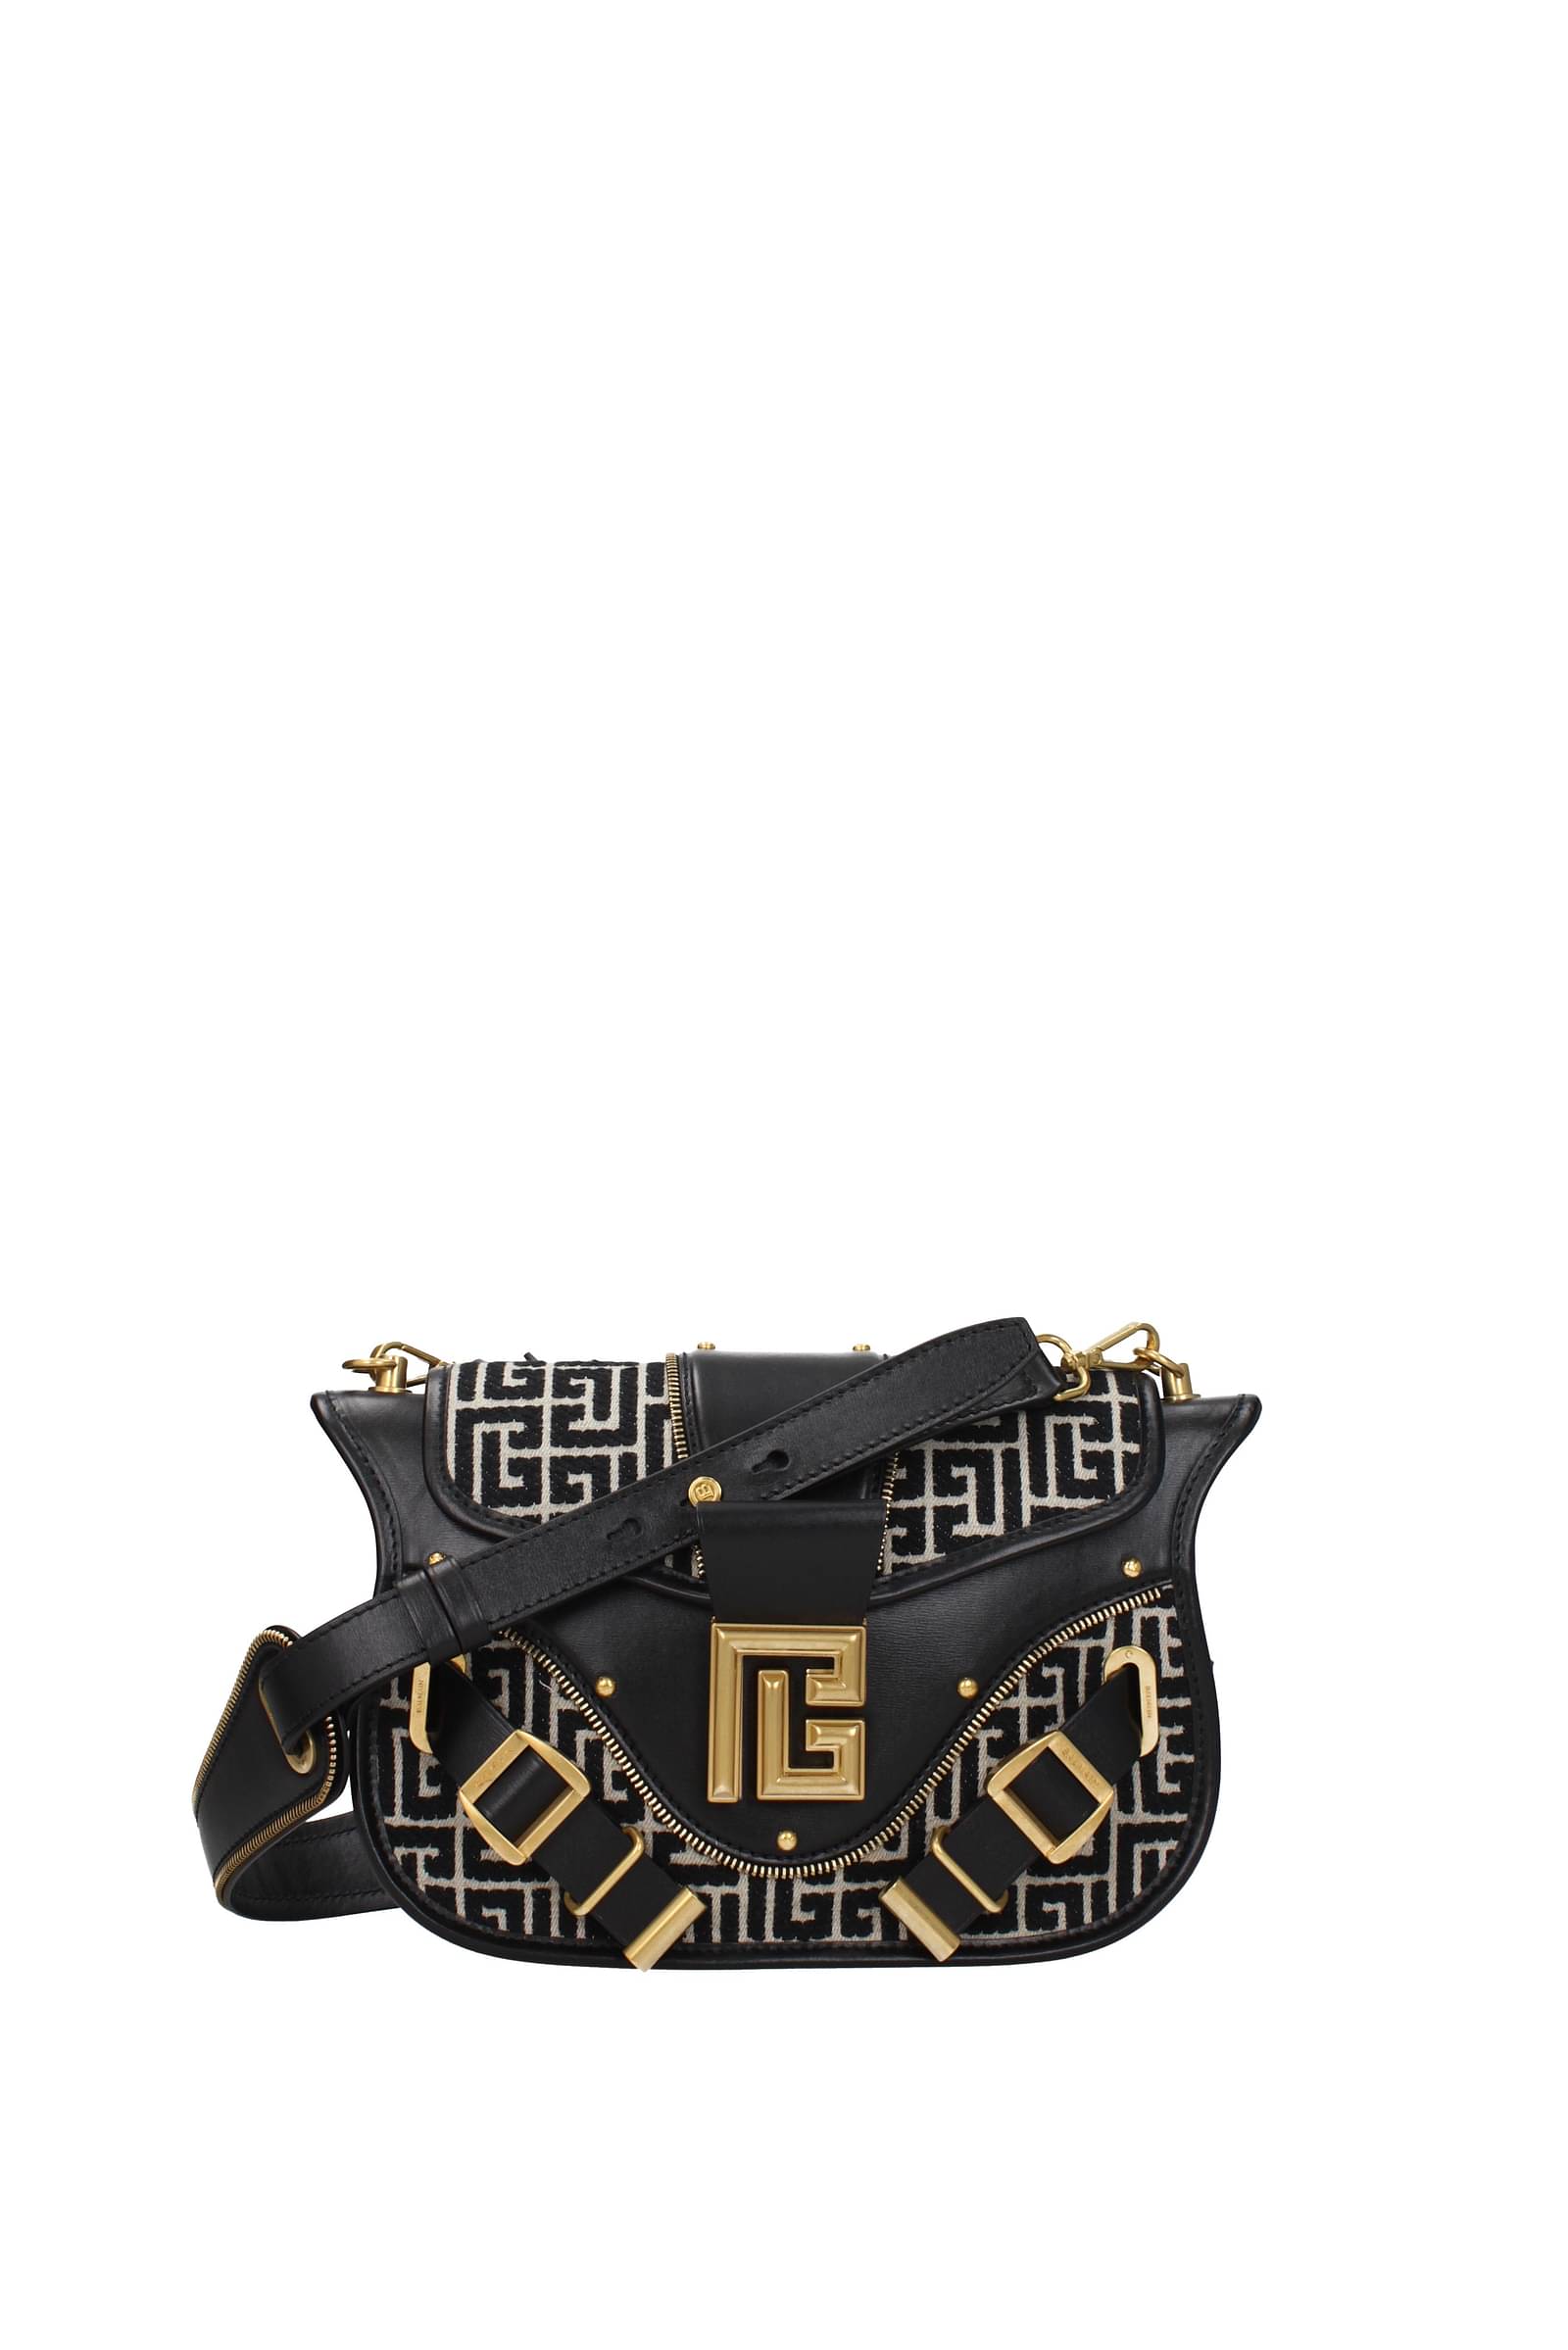 B-Army Pouch canvas and leather bag black - Women | BALMAIN